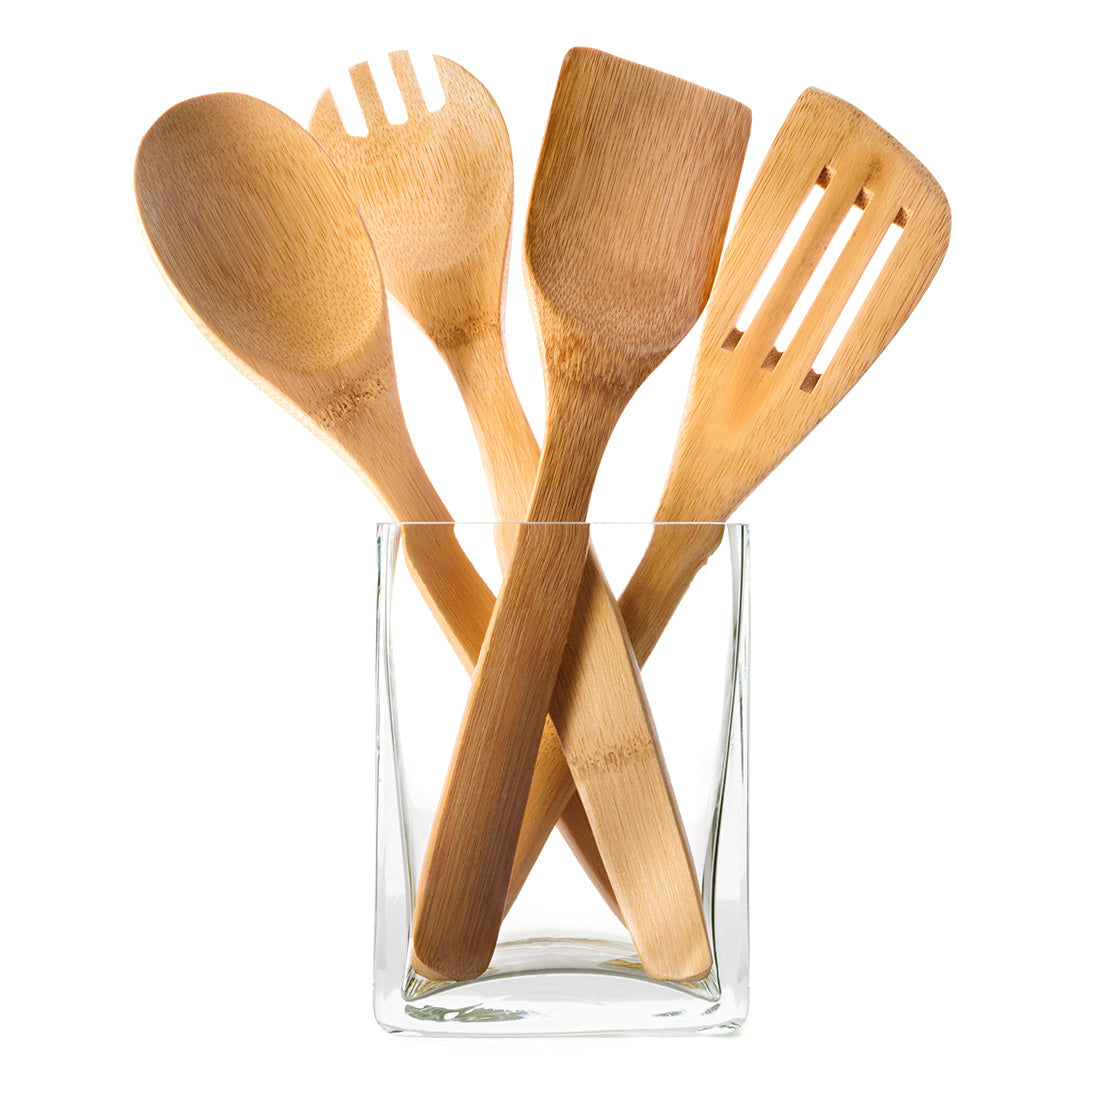 Wooden Kitchen Utensil Set of 6 | Bamboo Cooking Tools-3